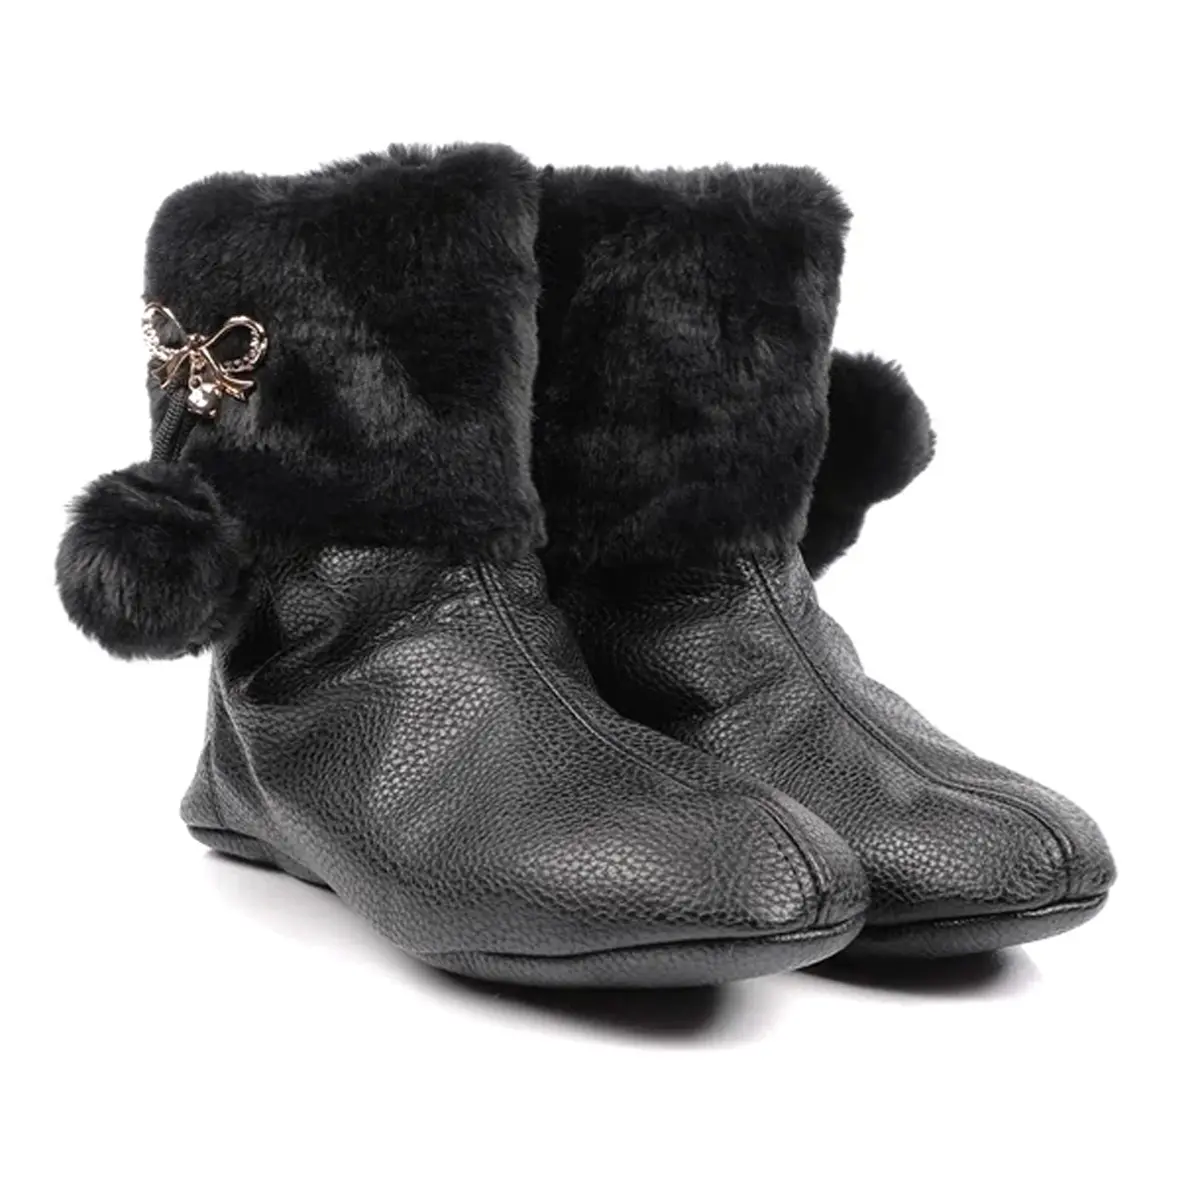 Exclusive and Versatile Women's Karapan Ichigi Leather Boots with Fur Trim Made in Uzbekistan by the Manufacturer